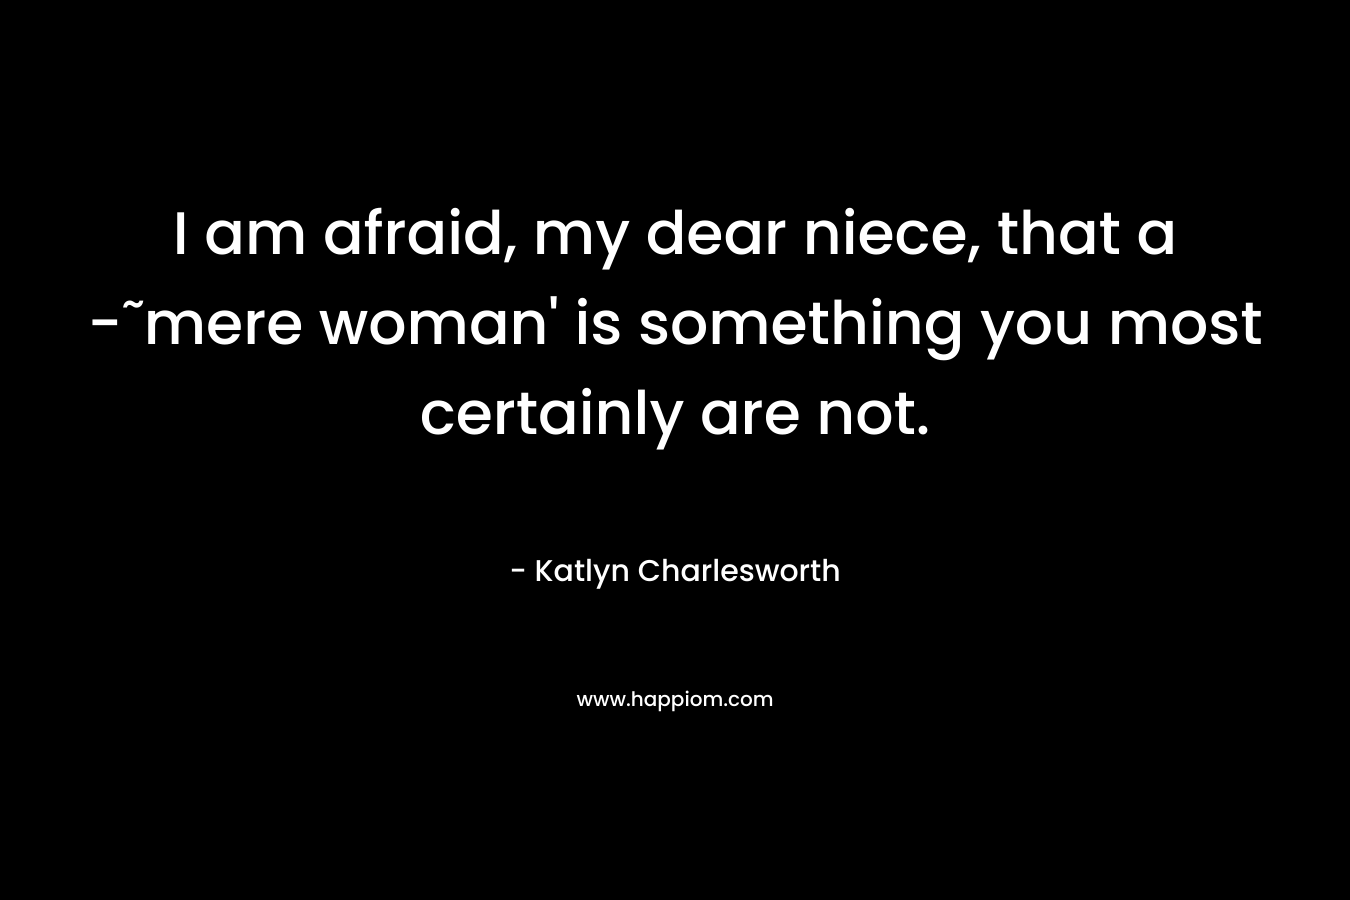 I am afraid, my dear niece, that a -˜mere woman’ is something you most certainly are not. – Katlyn Charlesworth